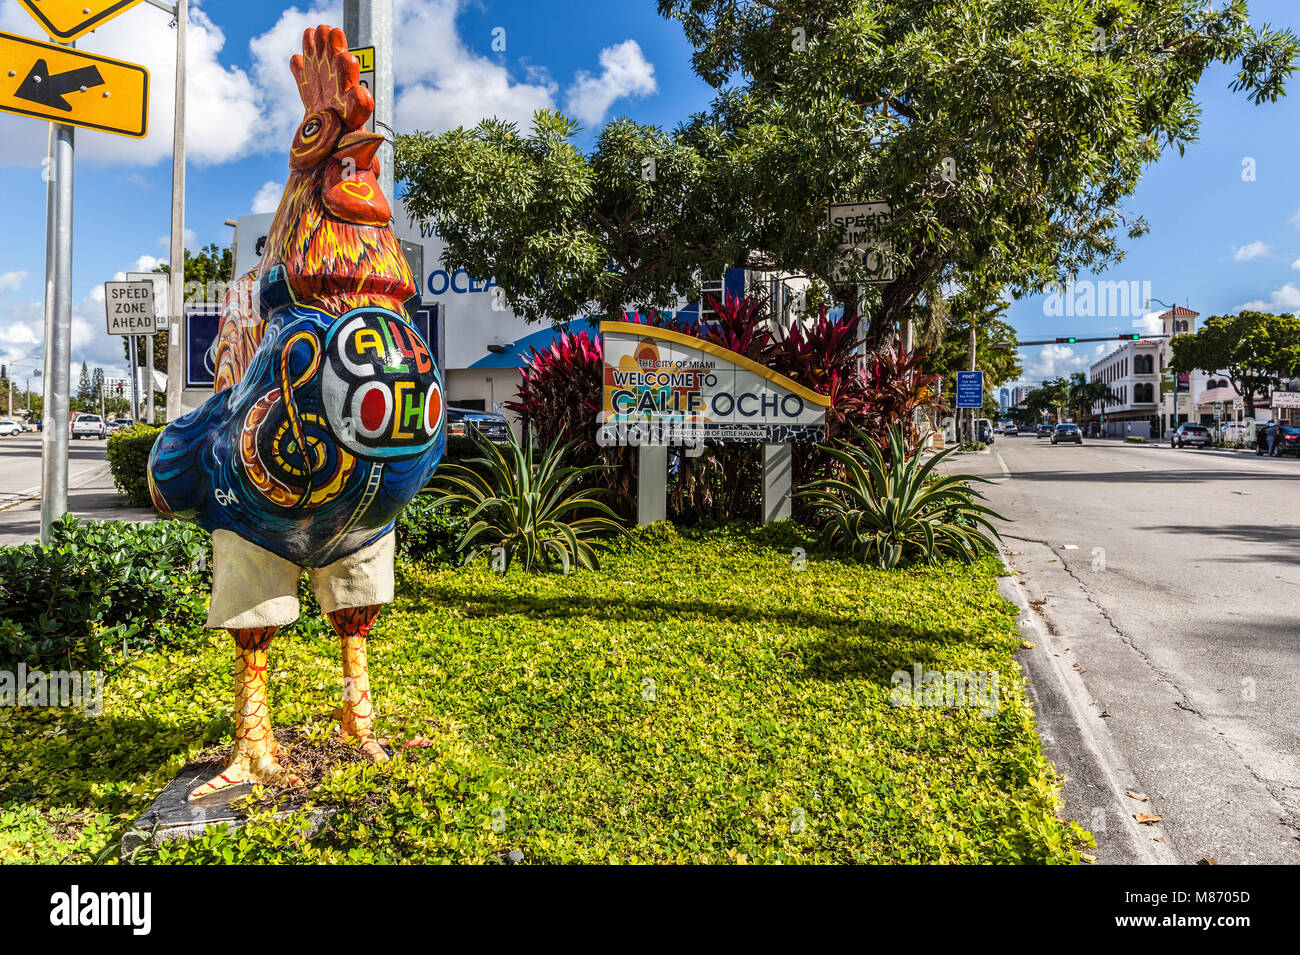 Large and colourful rooster sculpture on the roadside, Calle Ocho, Little Havana, Miami, Florida, USA. Stock Photo